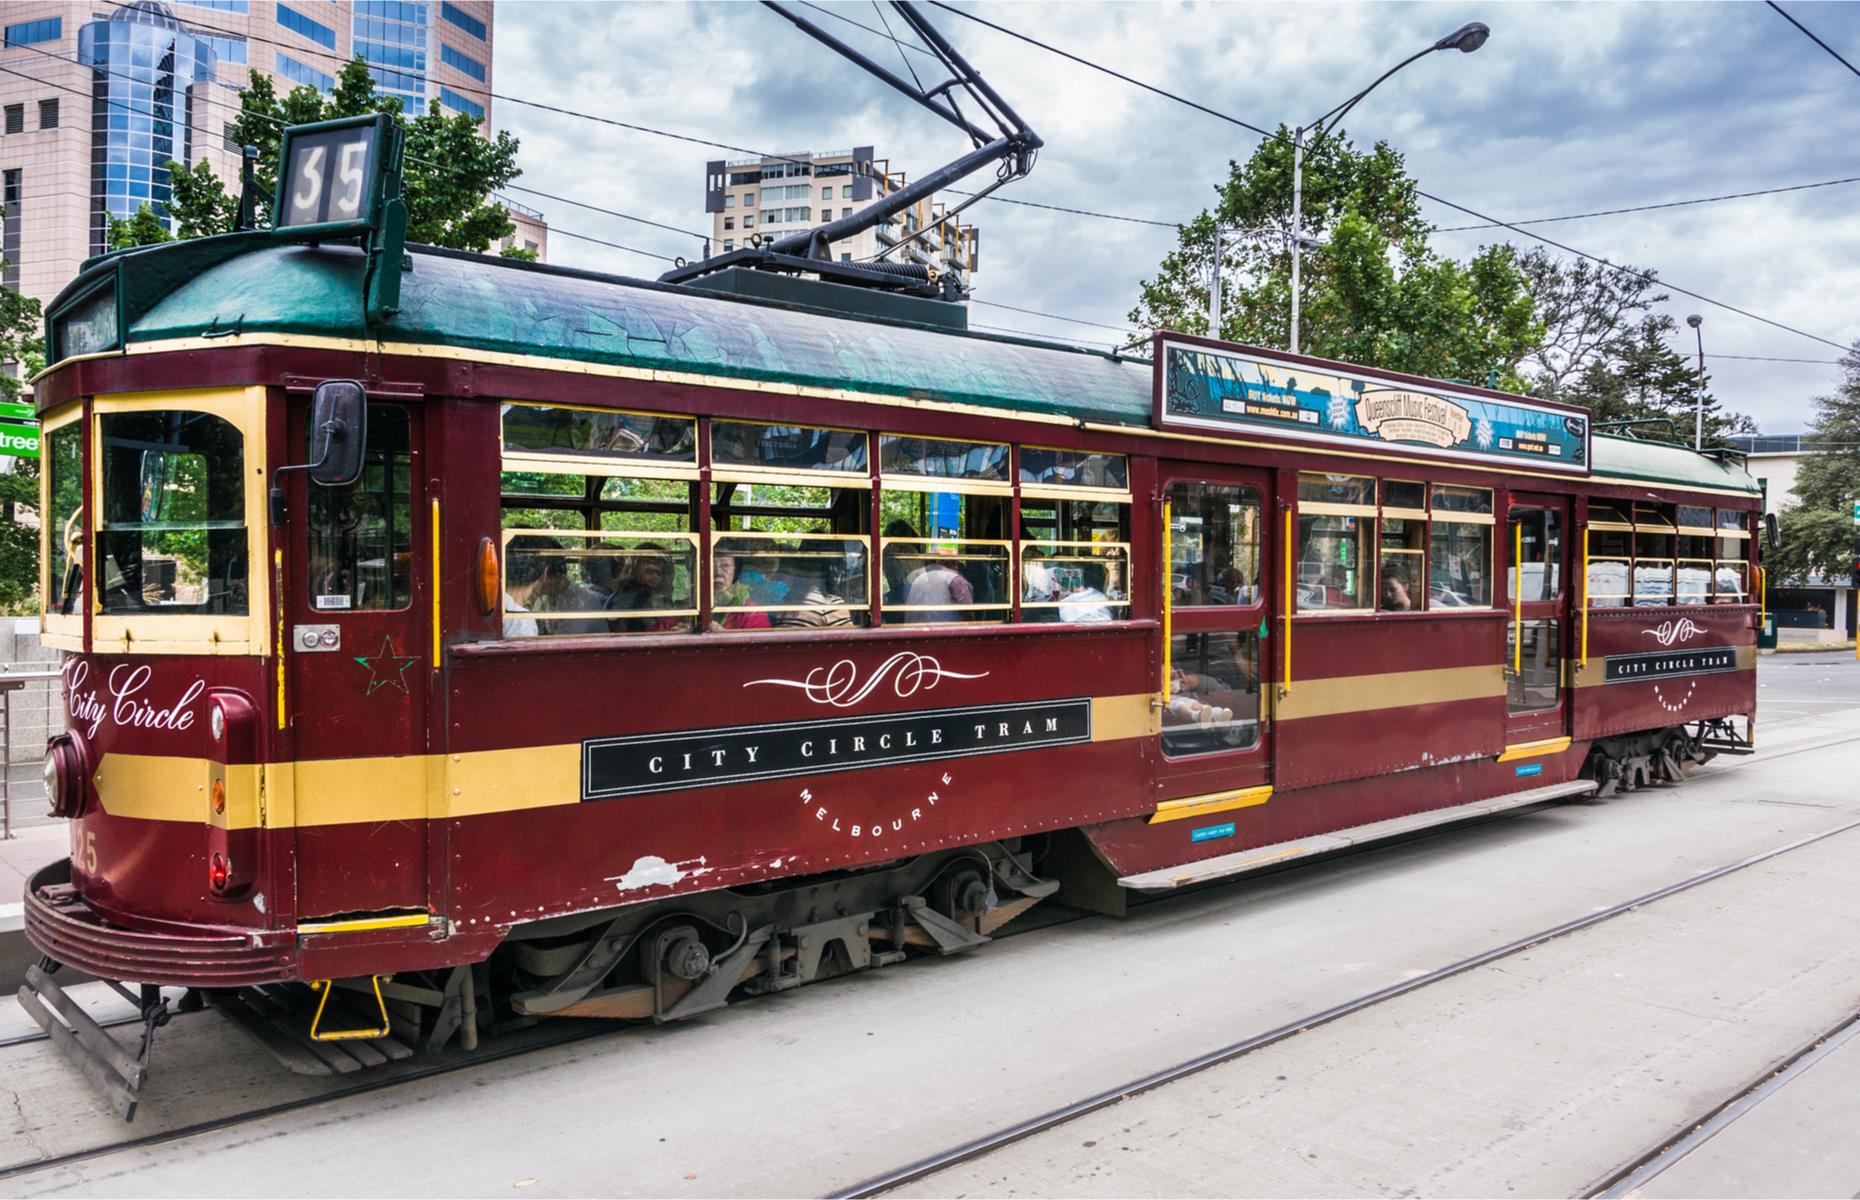 <p>Explore the big-hitting sights of Victoria’s capital in suitable style aboard a vintage W-class tram. You can hop on and off the <a href="https://www.ptv.vic.gov.au/route/1112/35/">City Circle Tram</a> (route number 35) on its journey around Melbourne’s centre for free. Or stay on for the full 60-minute tour to listen to the audio commentary. You’ll hear about the city's major attractions, including the Docklands, Federation Square with its galleries and restaurants, SEA Life Melbourne Aquarium and the landmark Princess Theatre. Better still, some of these are also free!</p>